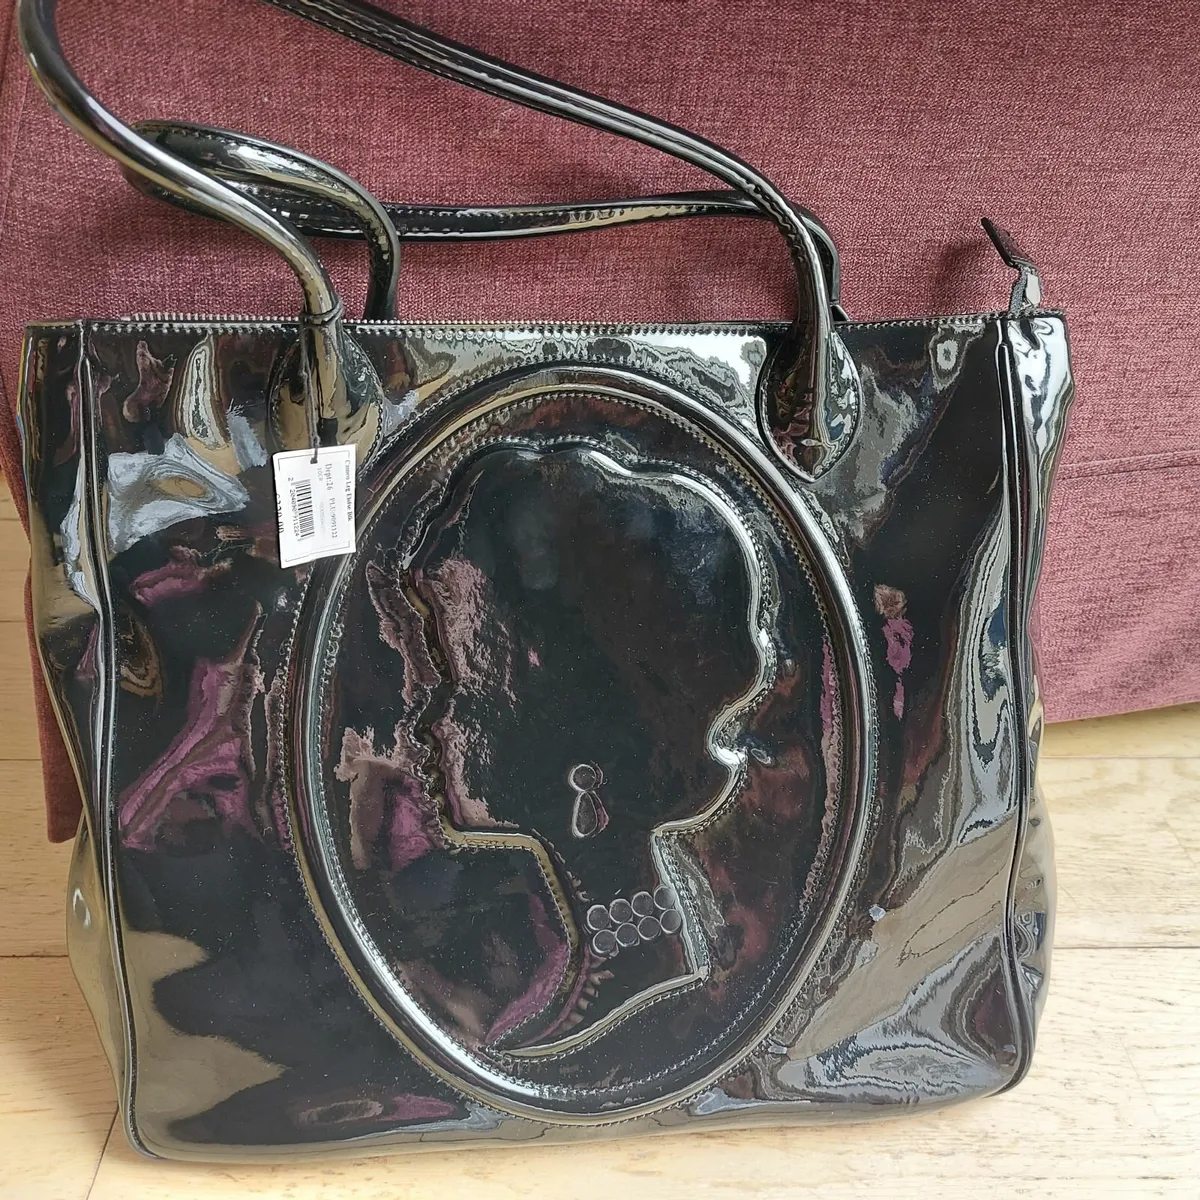 Lulu Guinness Bag, Brand new with tags - Image 2